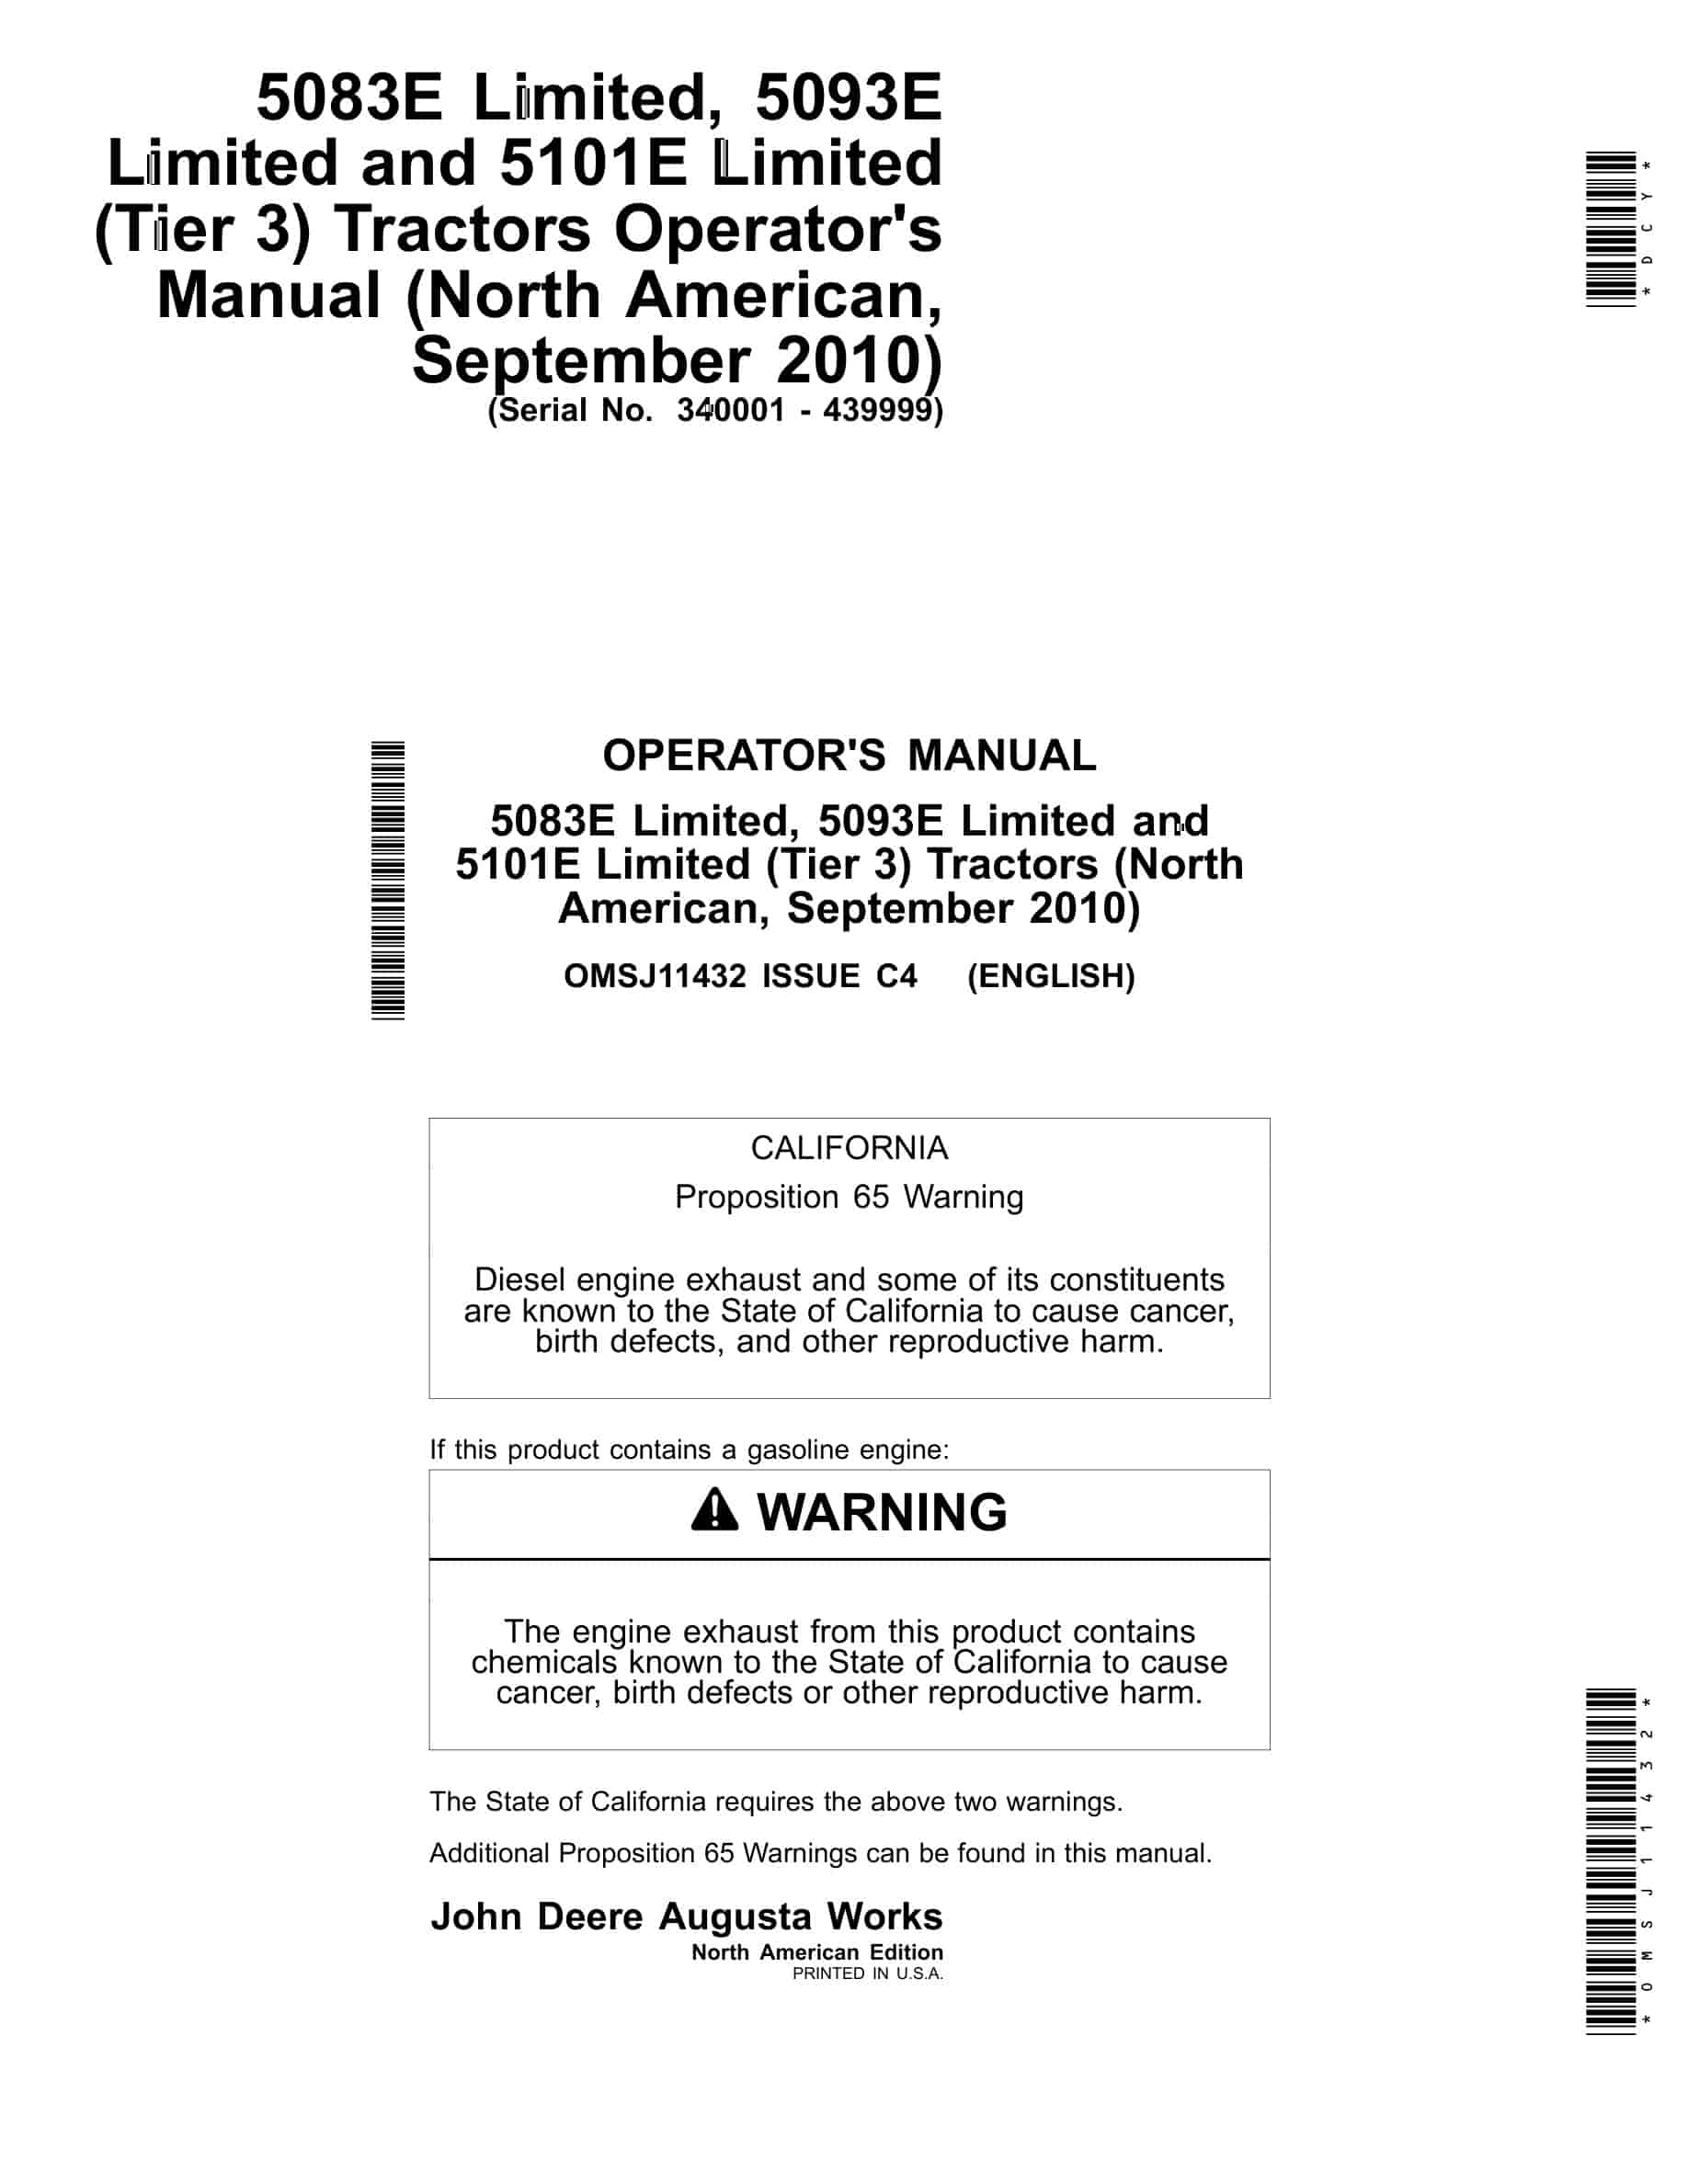 John Deere 5083E Limited, 5093E Limited and 5101E Limited (Tier 3) Tractor Operator Manual OMSJ11432-1